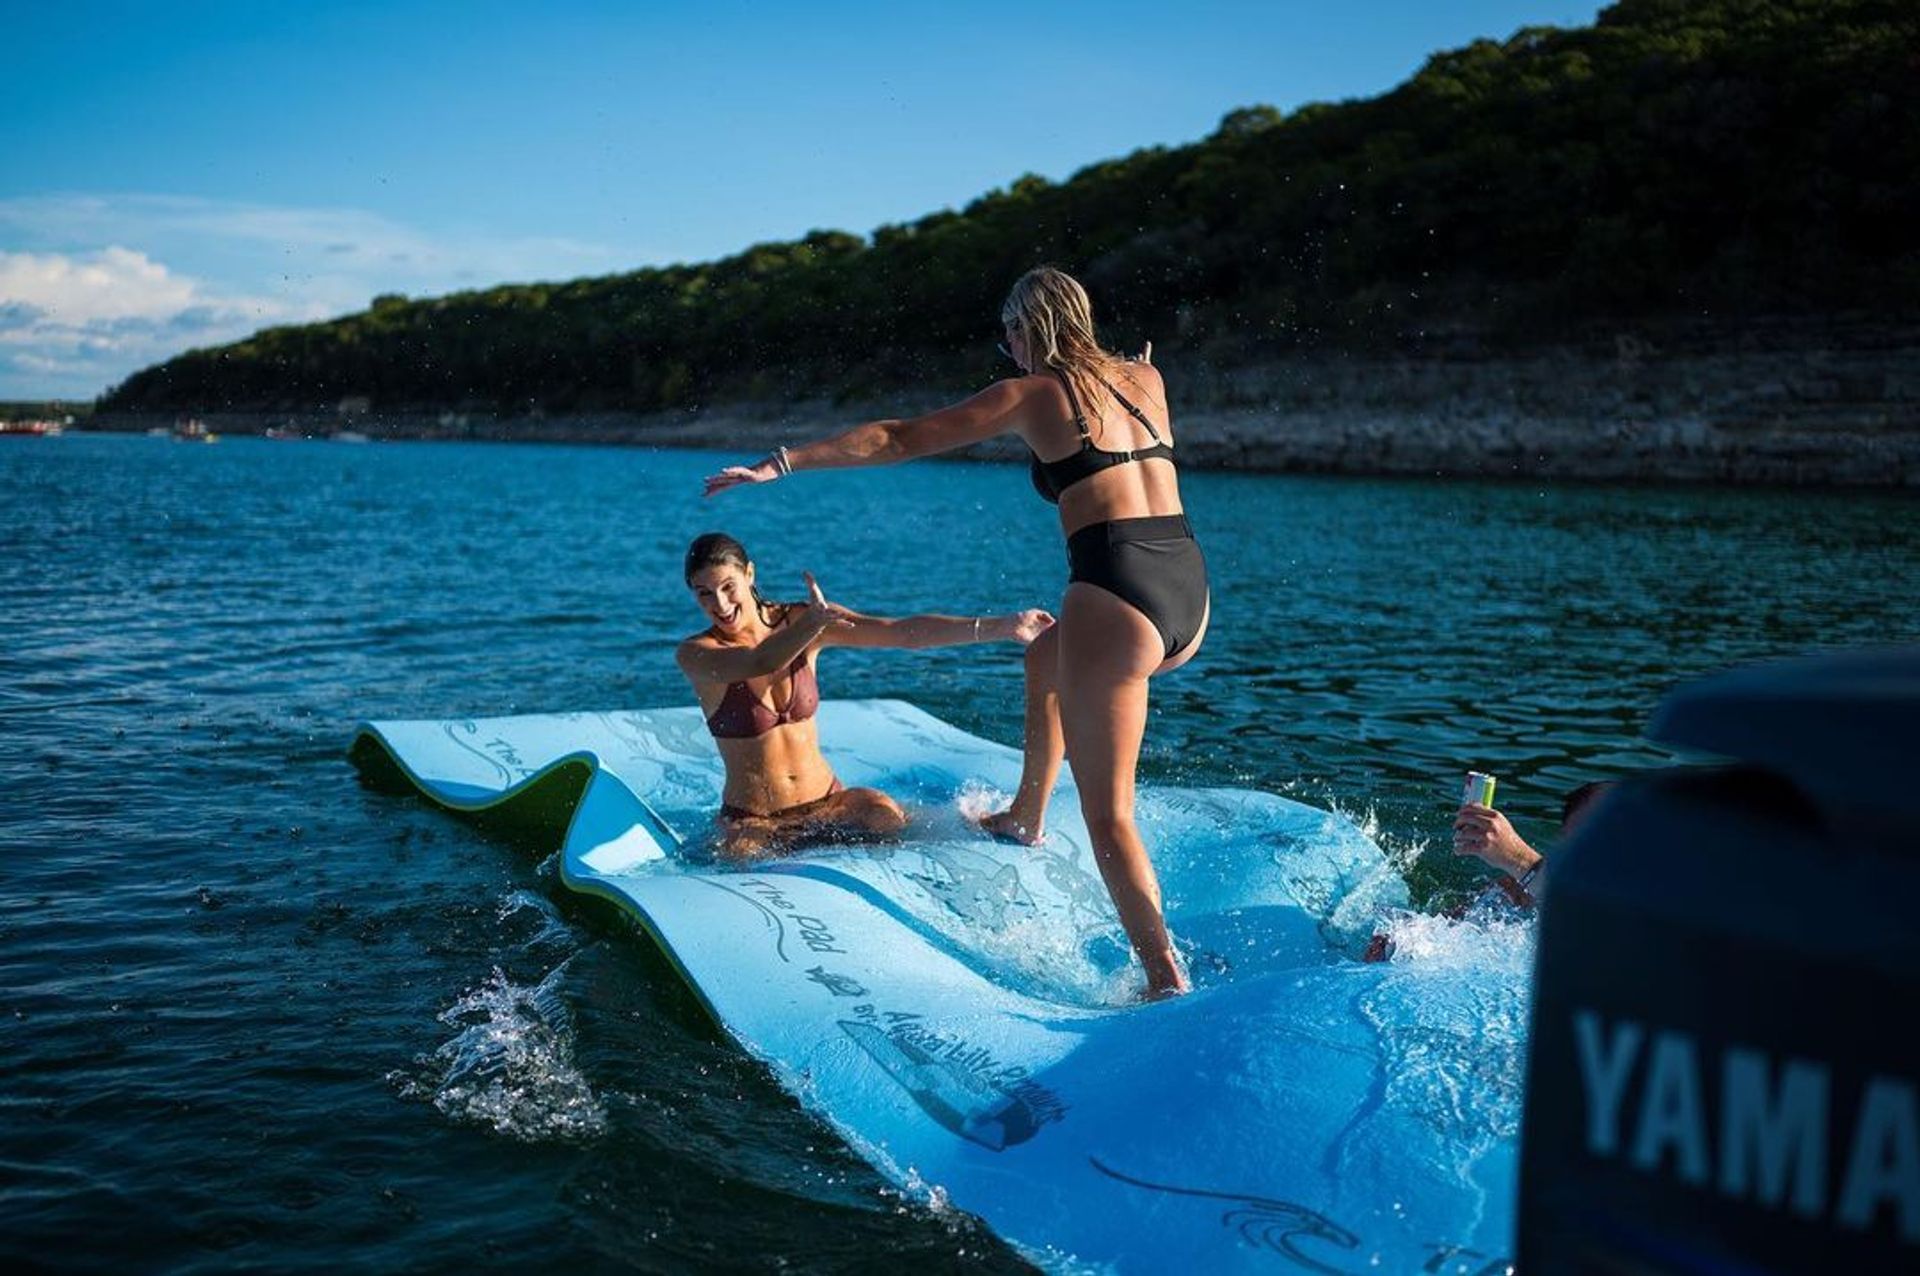 Lake Travis Private Pontoon Party at Devils Cove: 4-8 Hrs BYOB Charter, Captain, and Party Pad image 8